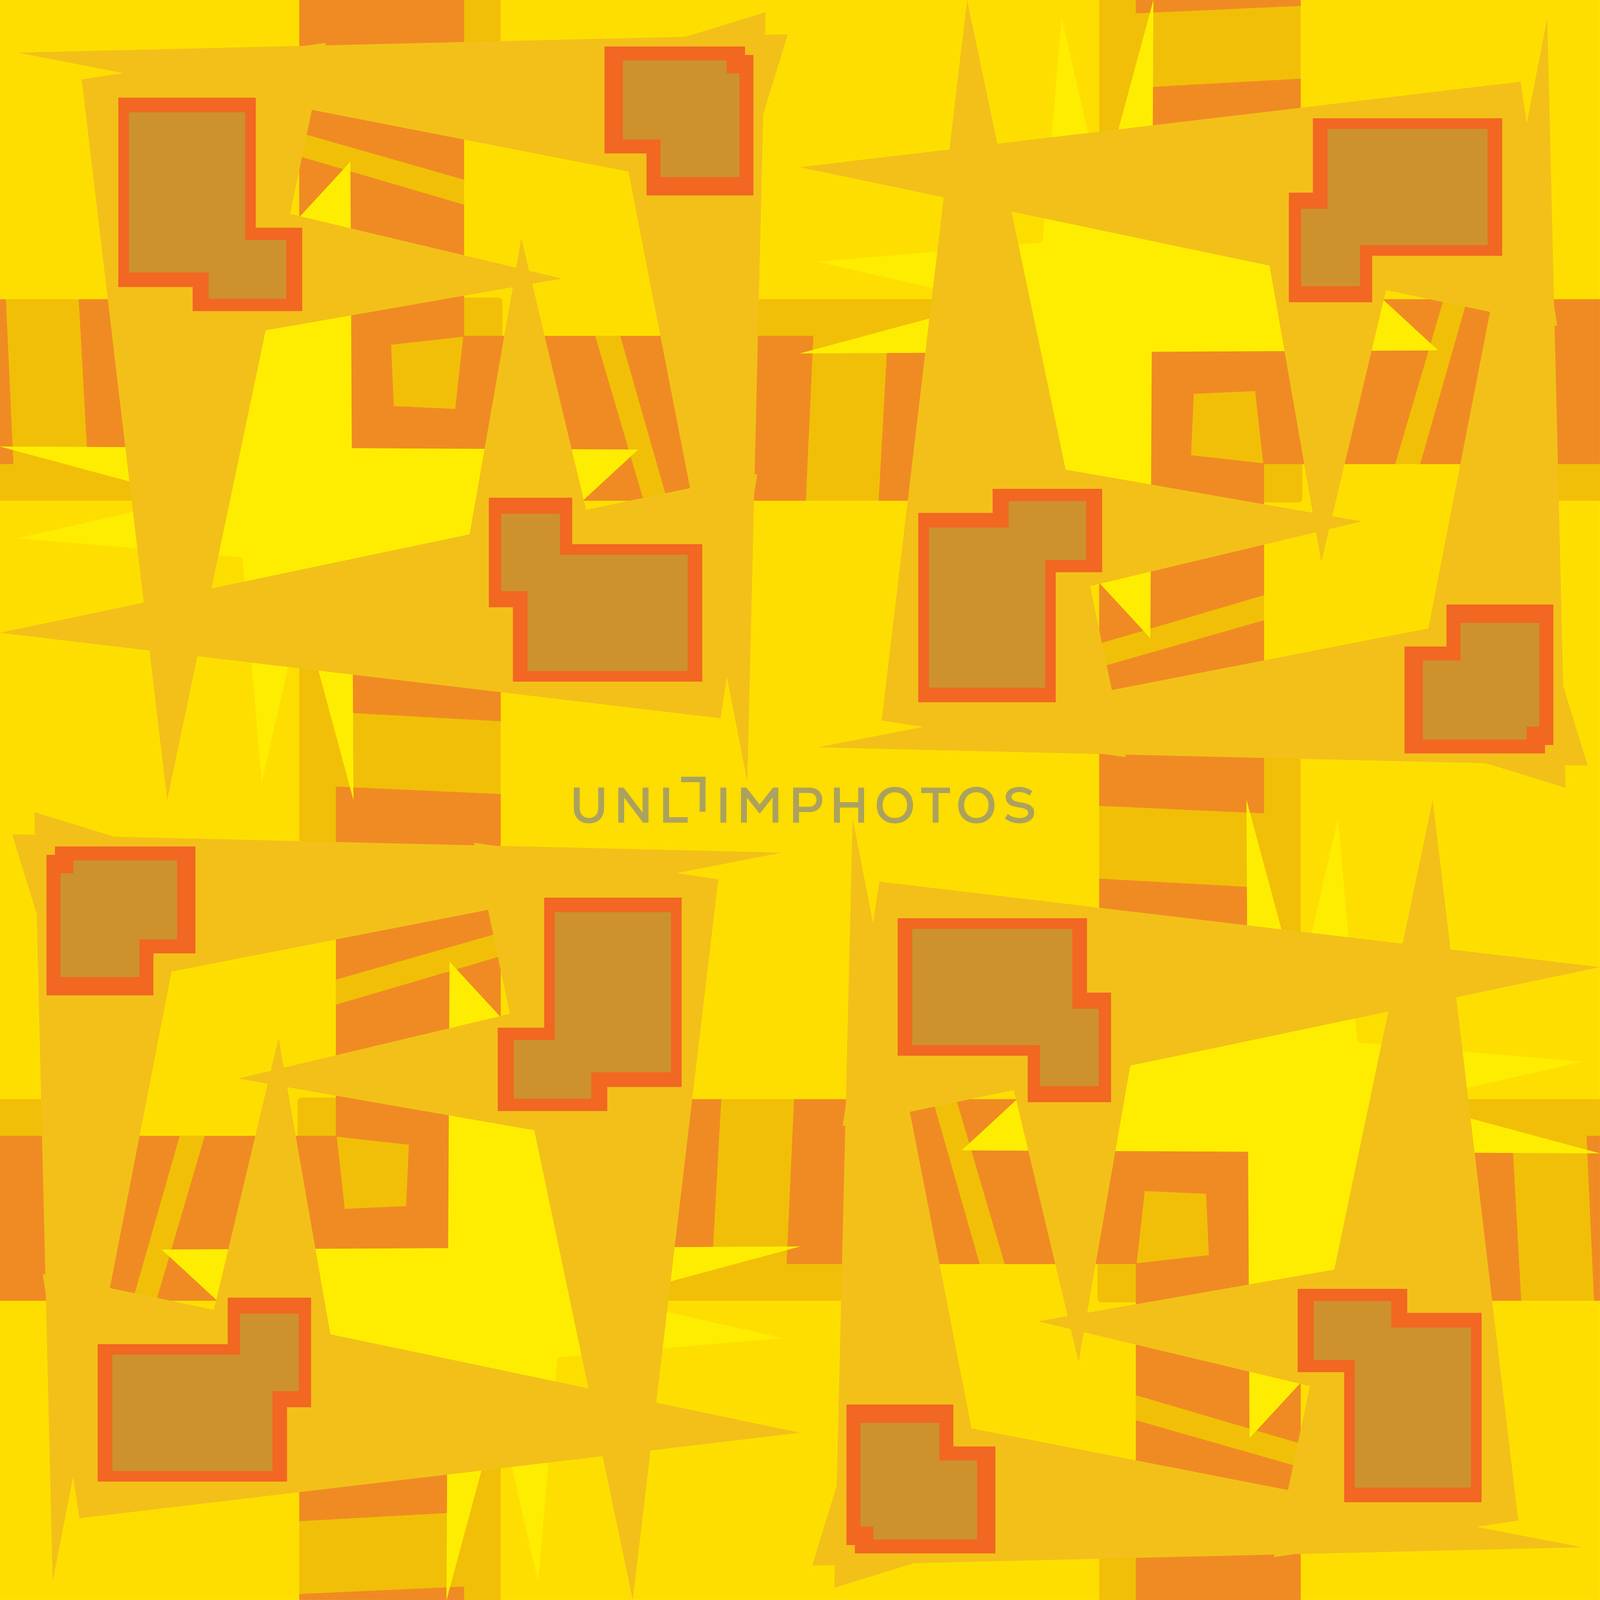 Abstract yellow rectangular shapes and lines in repeating pattern